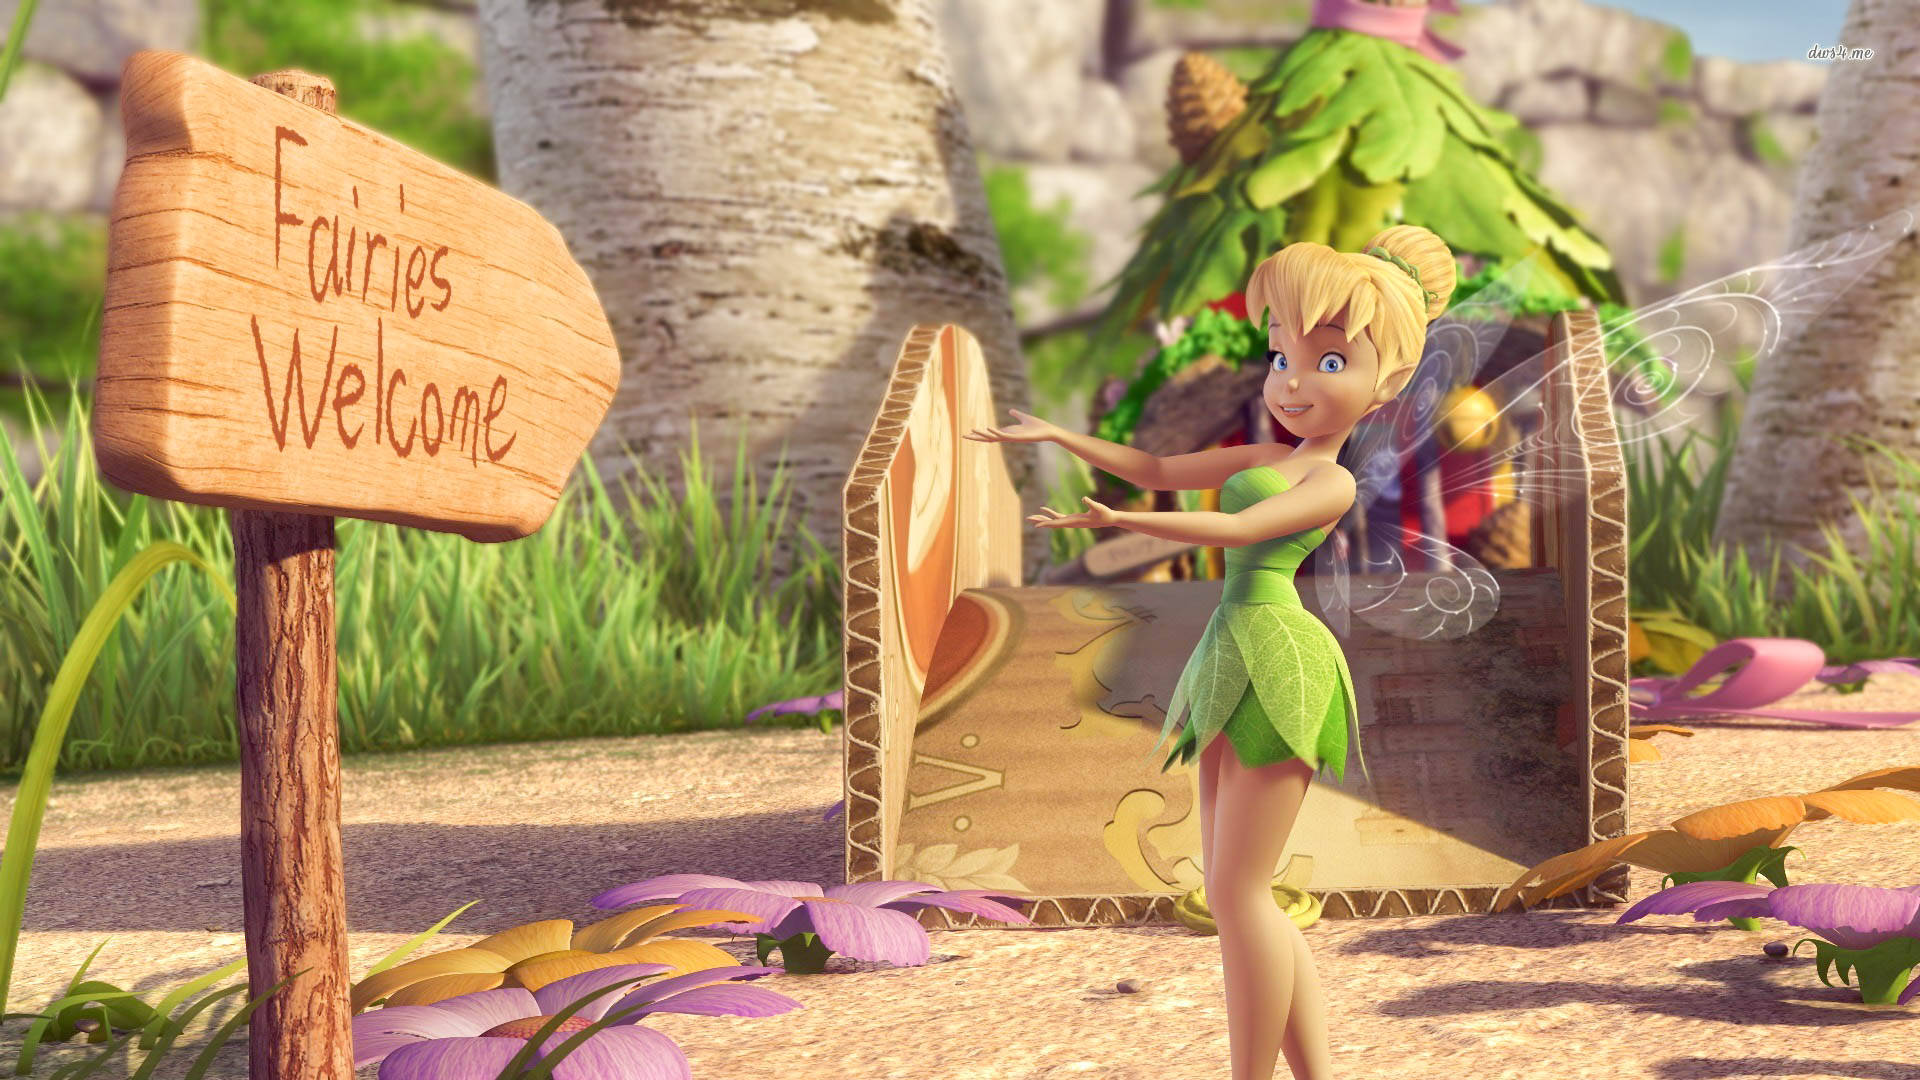 Tinker Bell With Greeting Sign Background